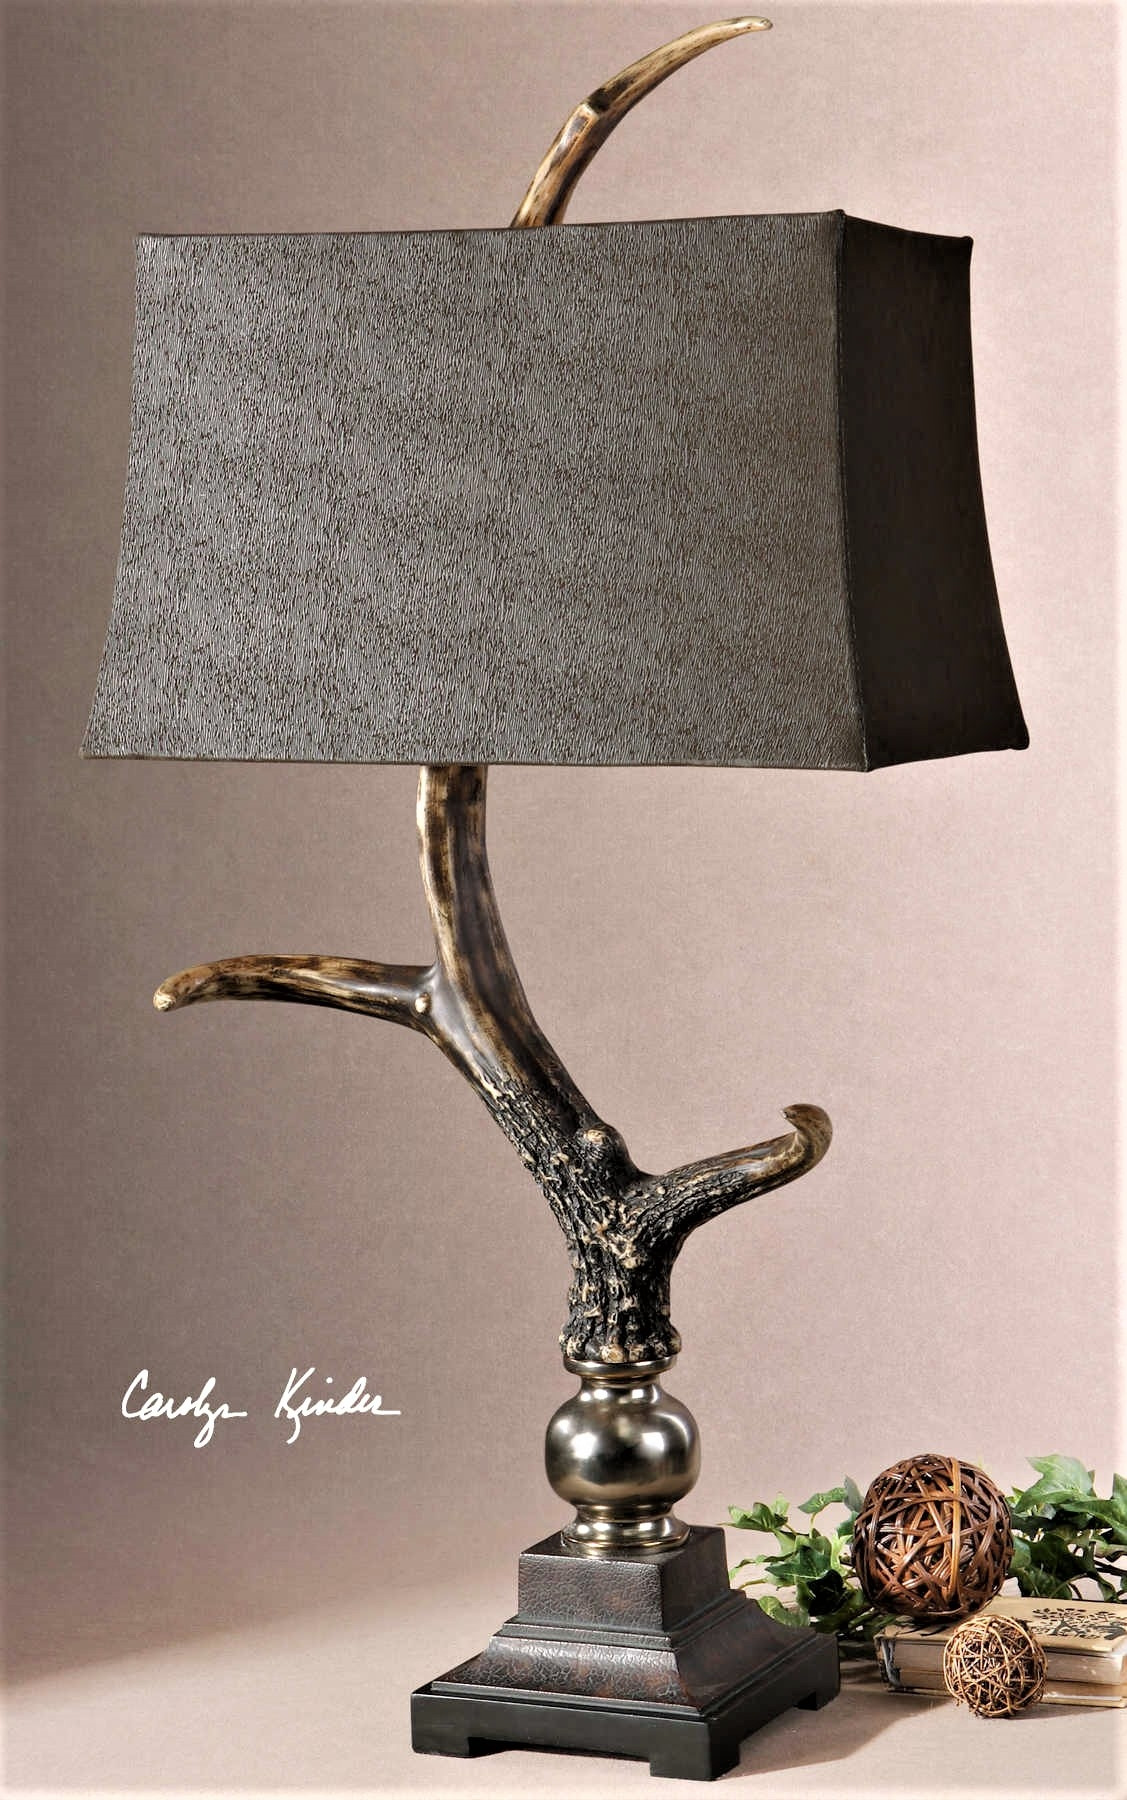 stag-horn-table-lamp2